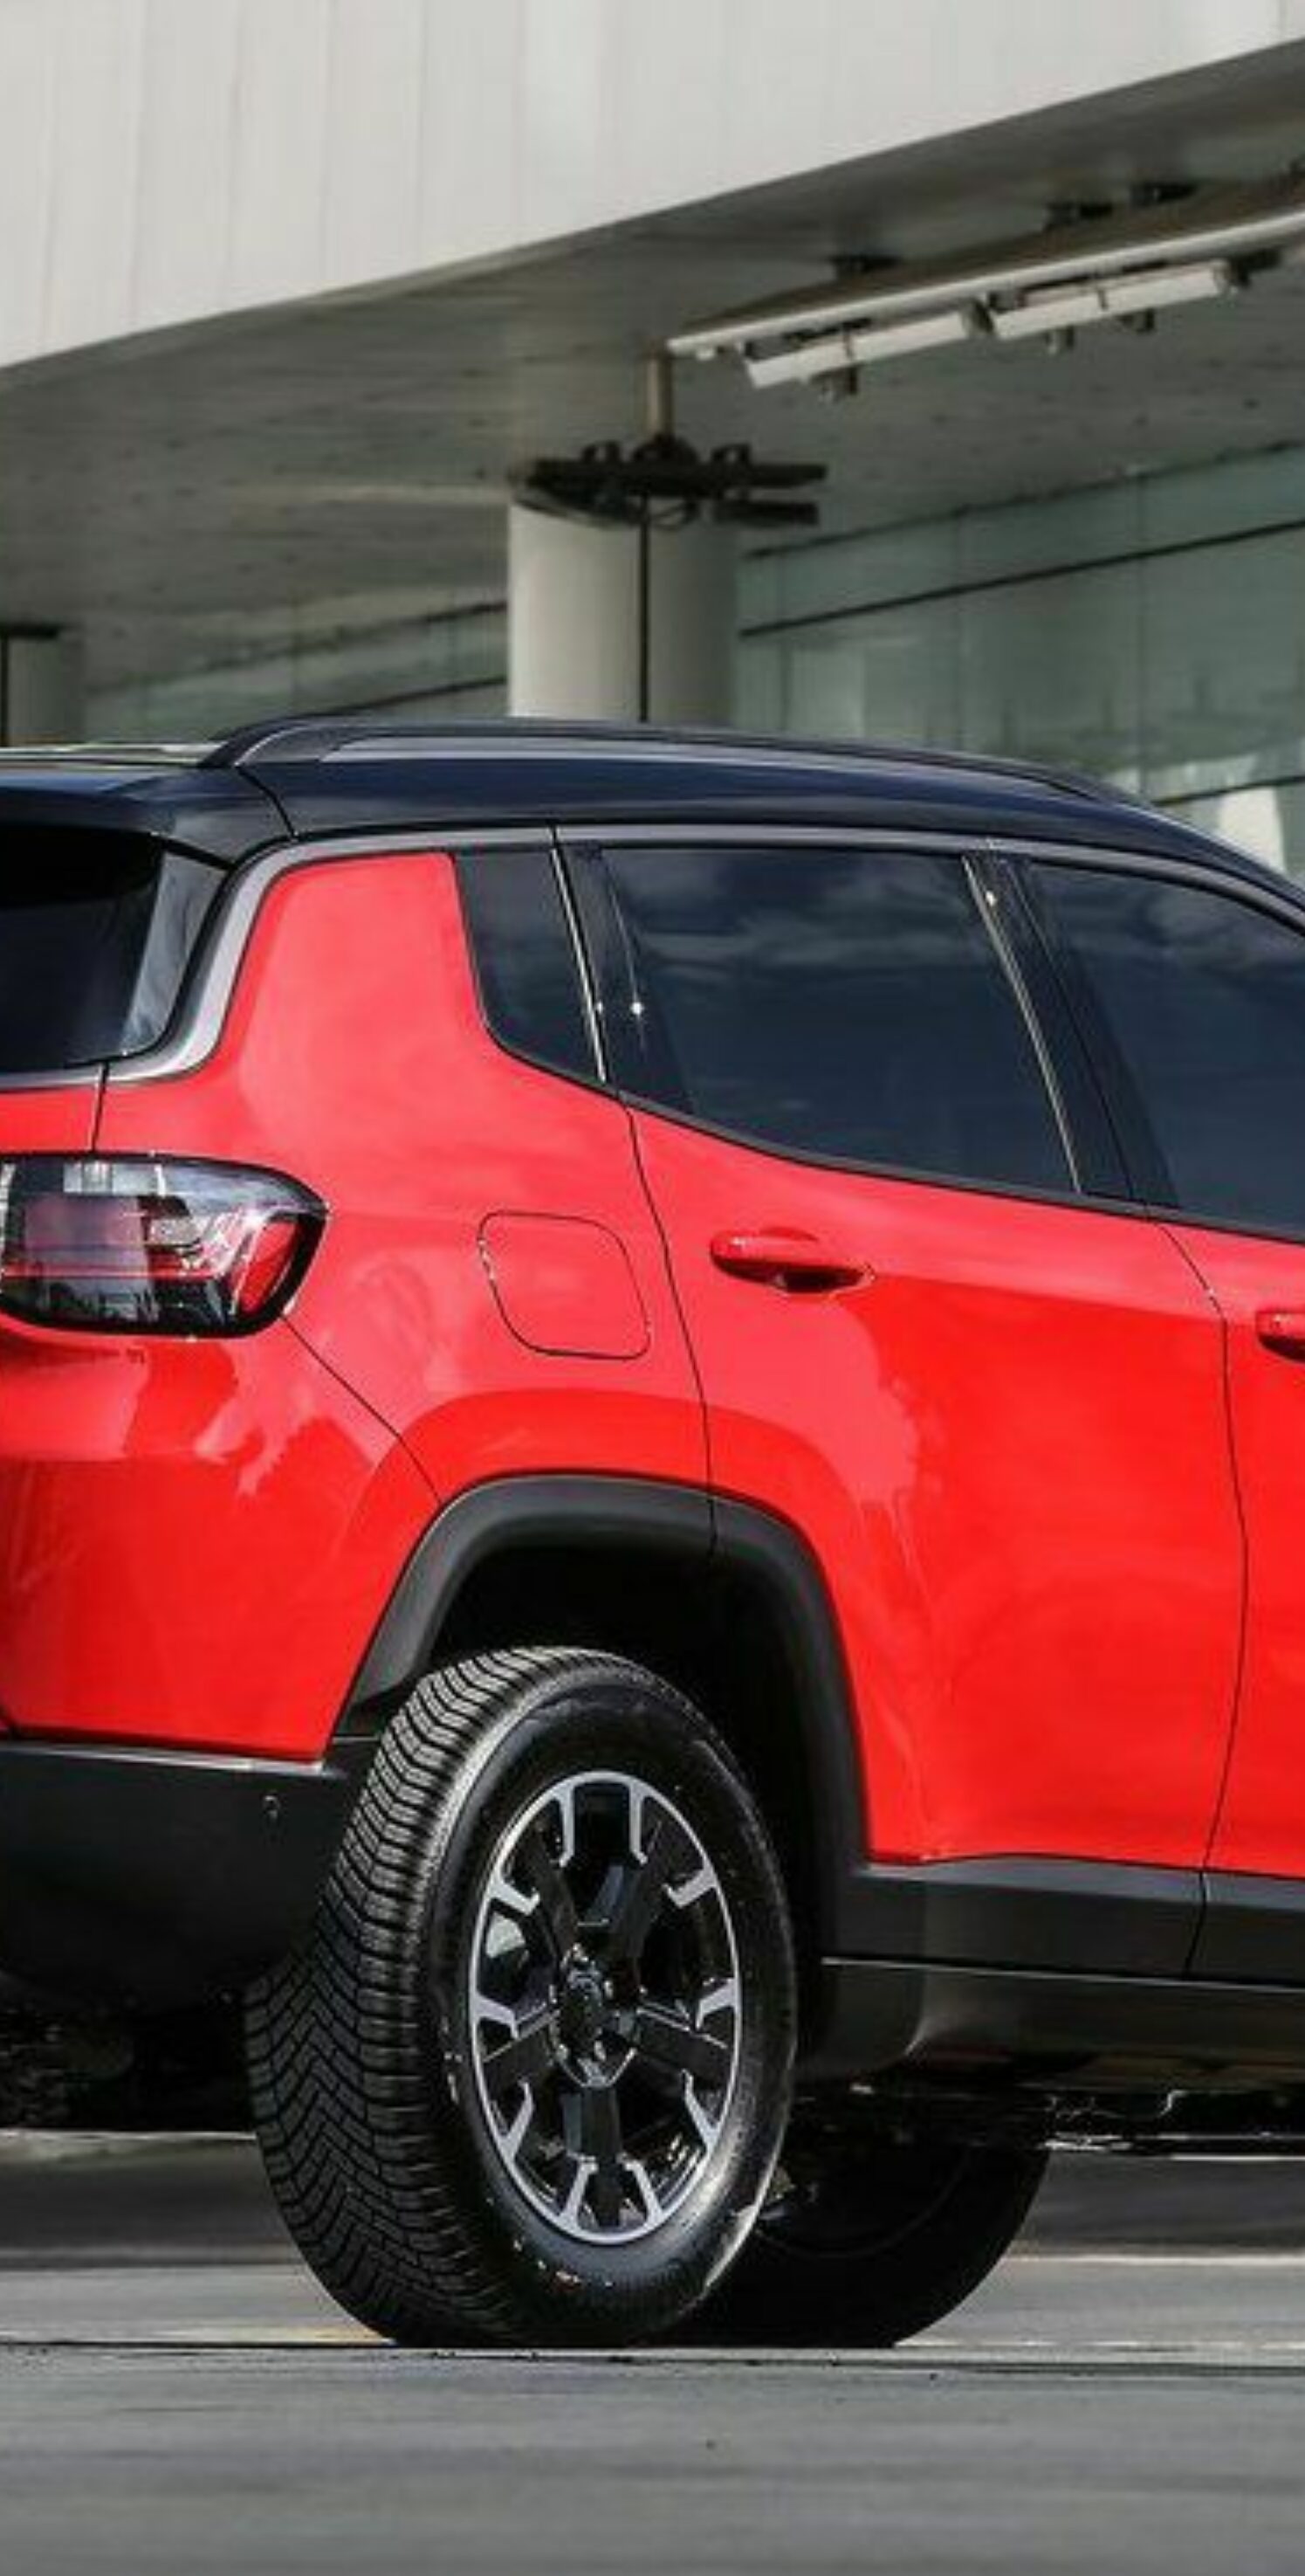 https://autofilter.sk/assets/images/compass/gallery/jeep-compass-2021_21-galeria.jpg - obrazok